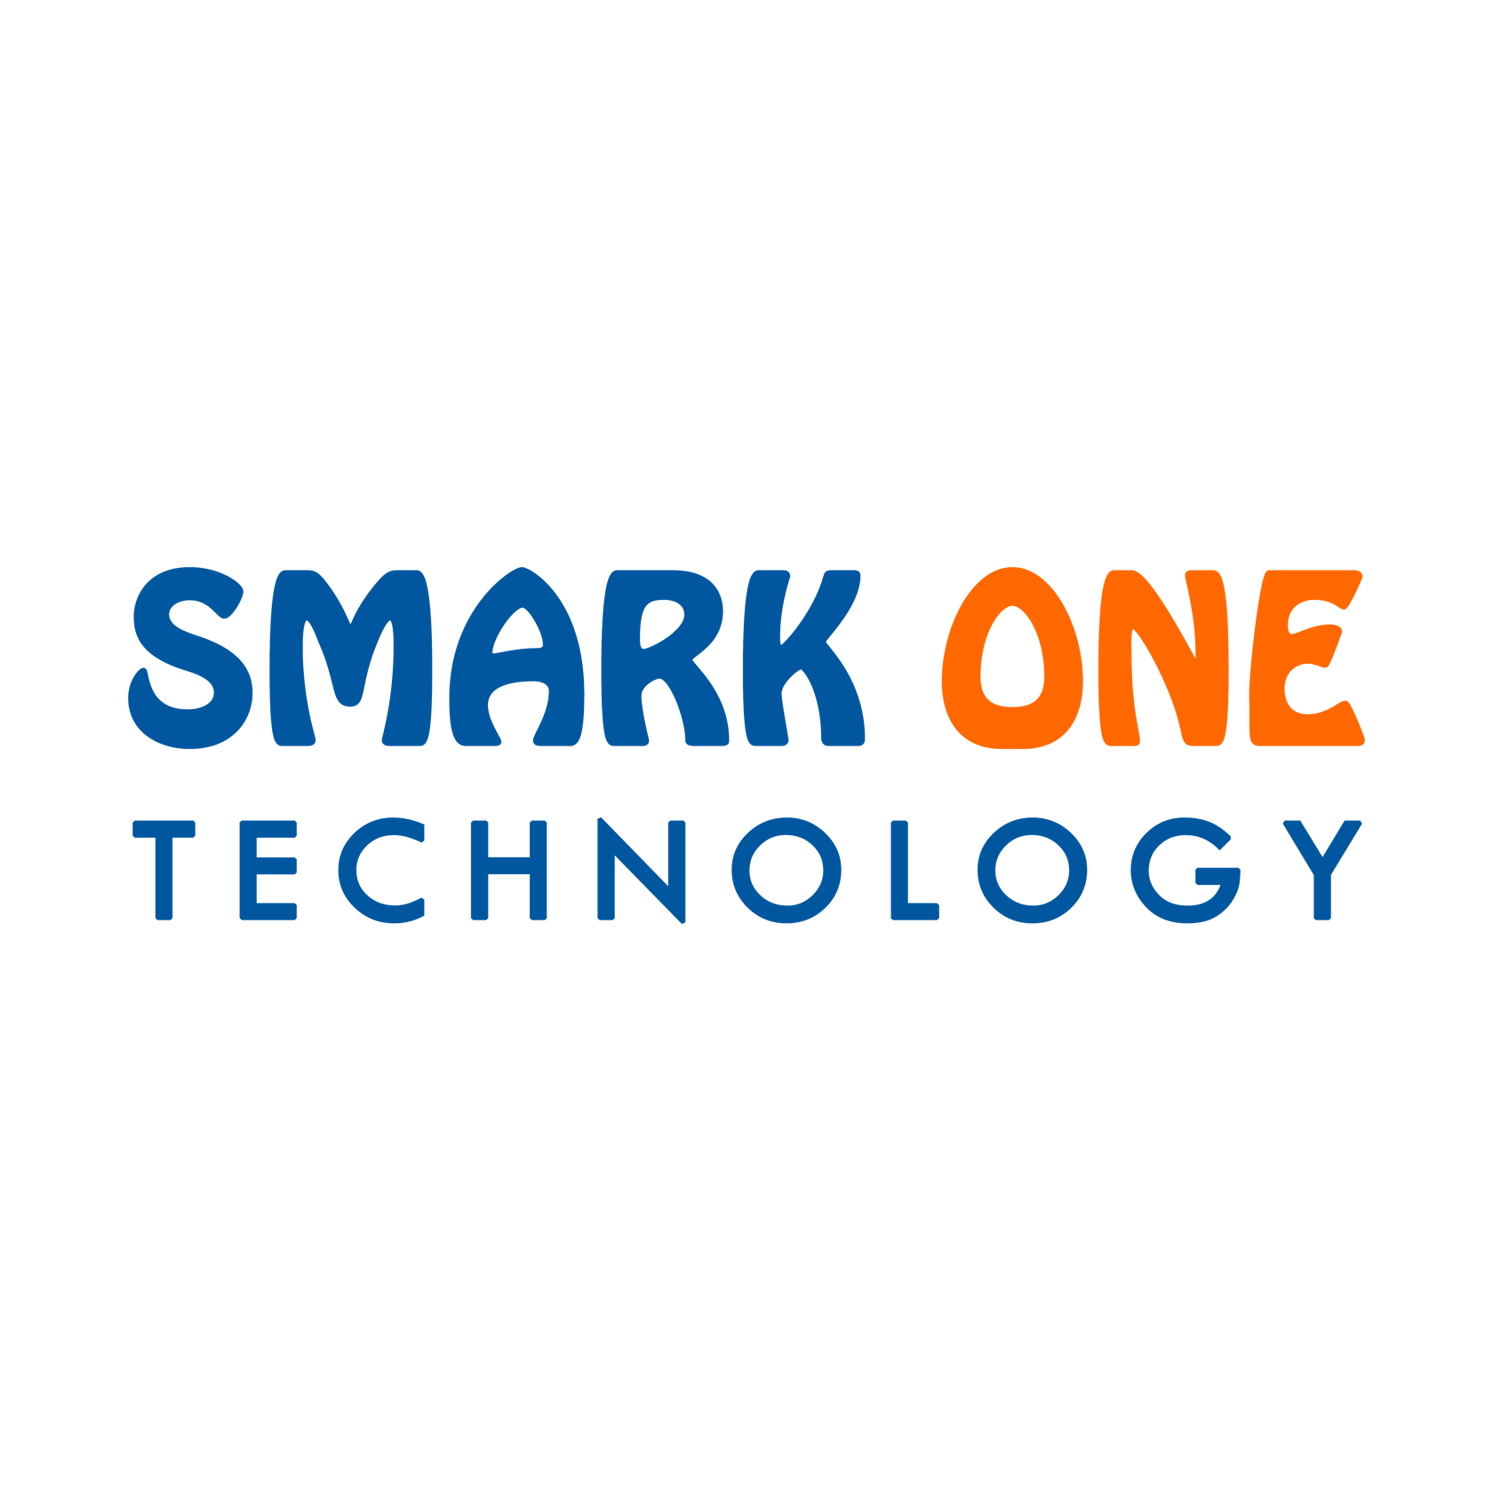 Smark One Technology Pvt. Ltd. profile on Qualified.One